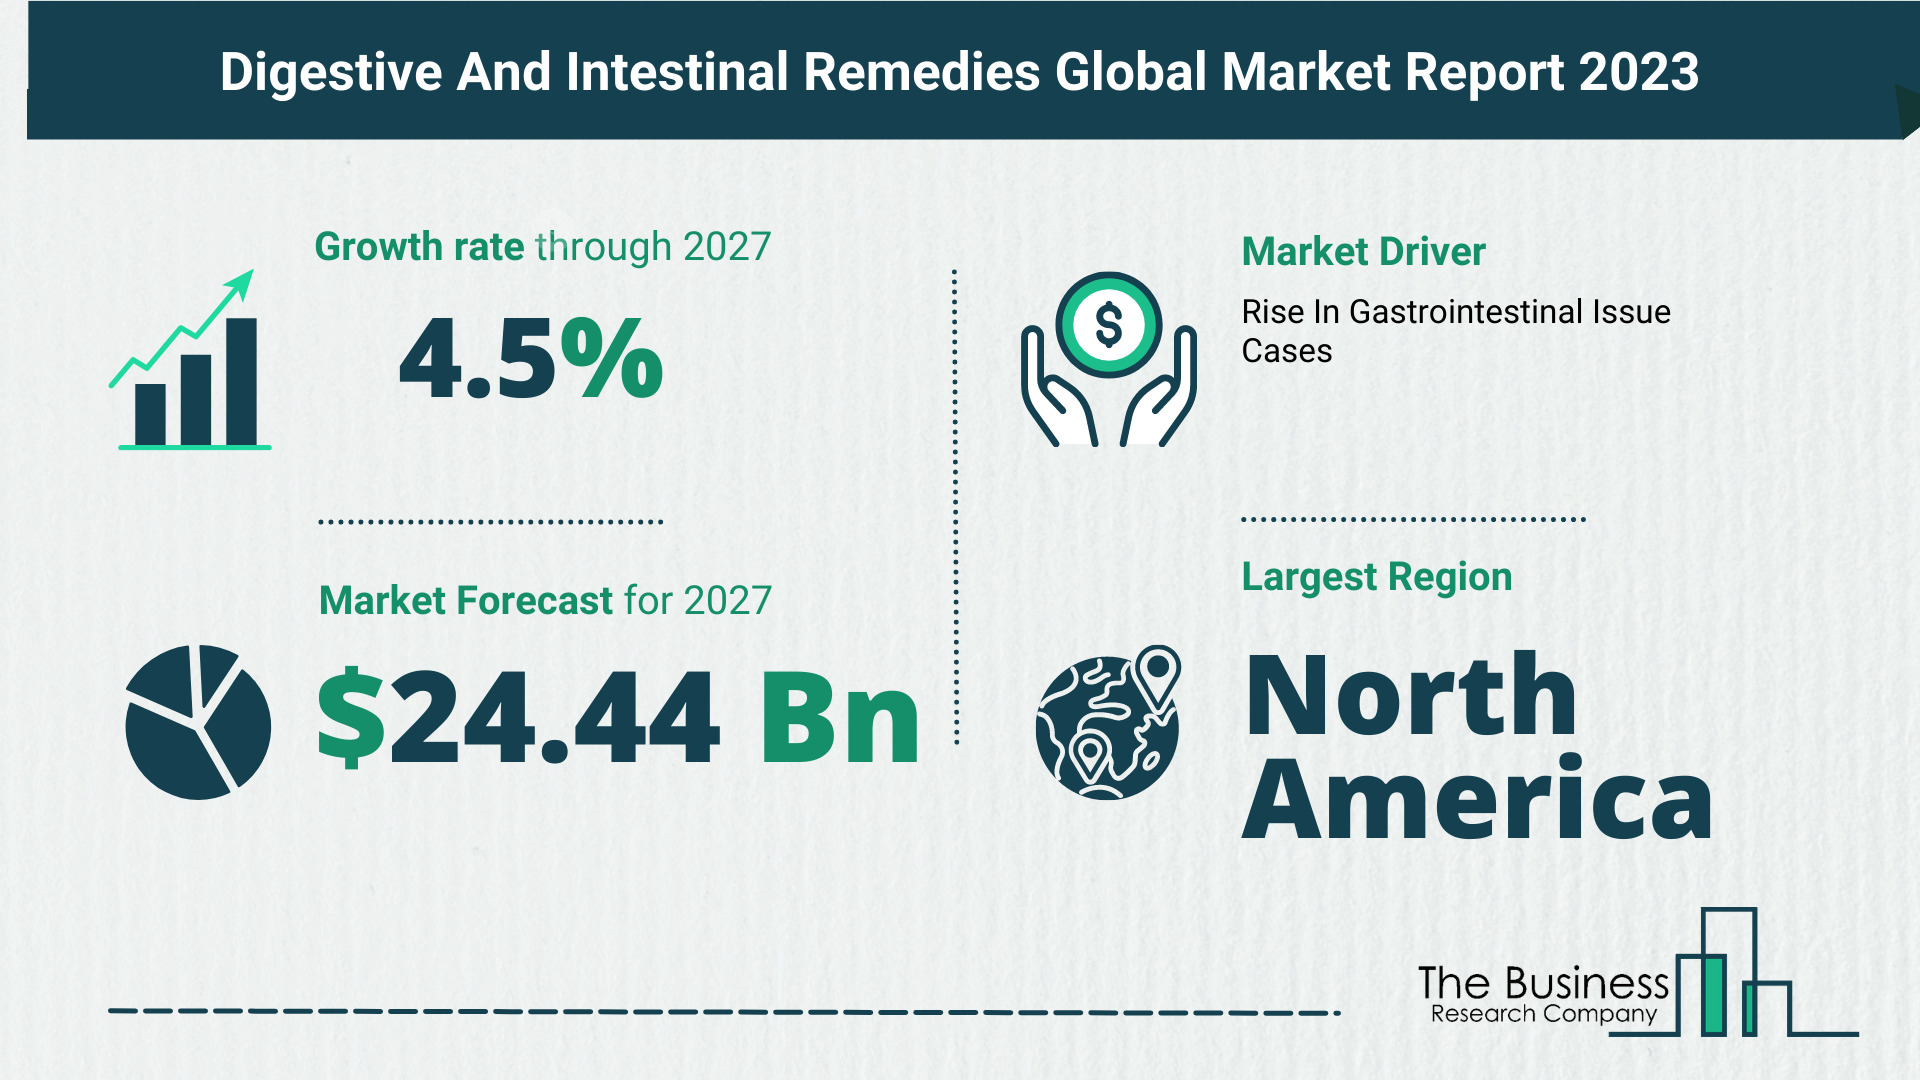 Overview Of The Digestive And Intestinal Remedies Market 2023: Size, Drivers, And Trends